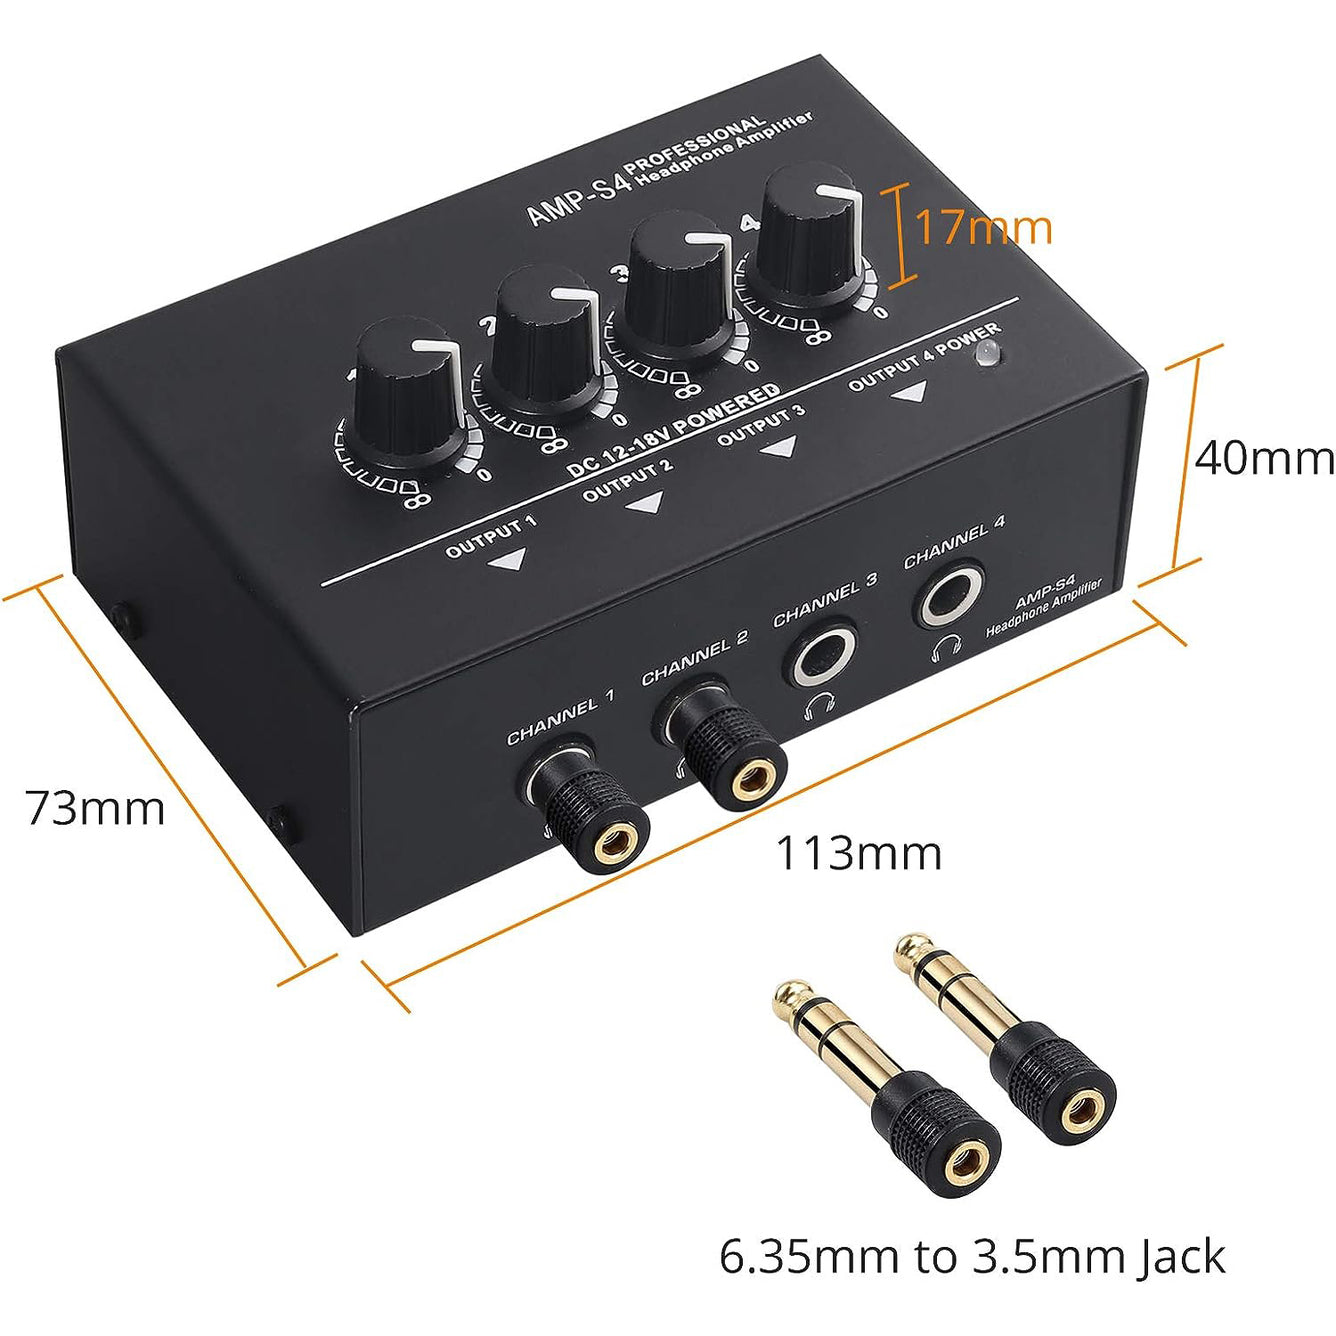 Neoteck Portable 4-Channel Stereo Headphone Amplifier